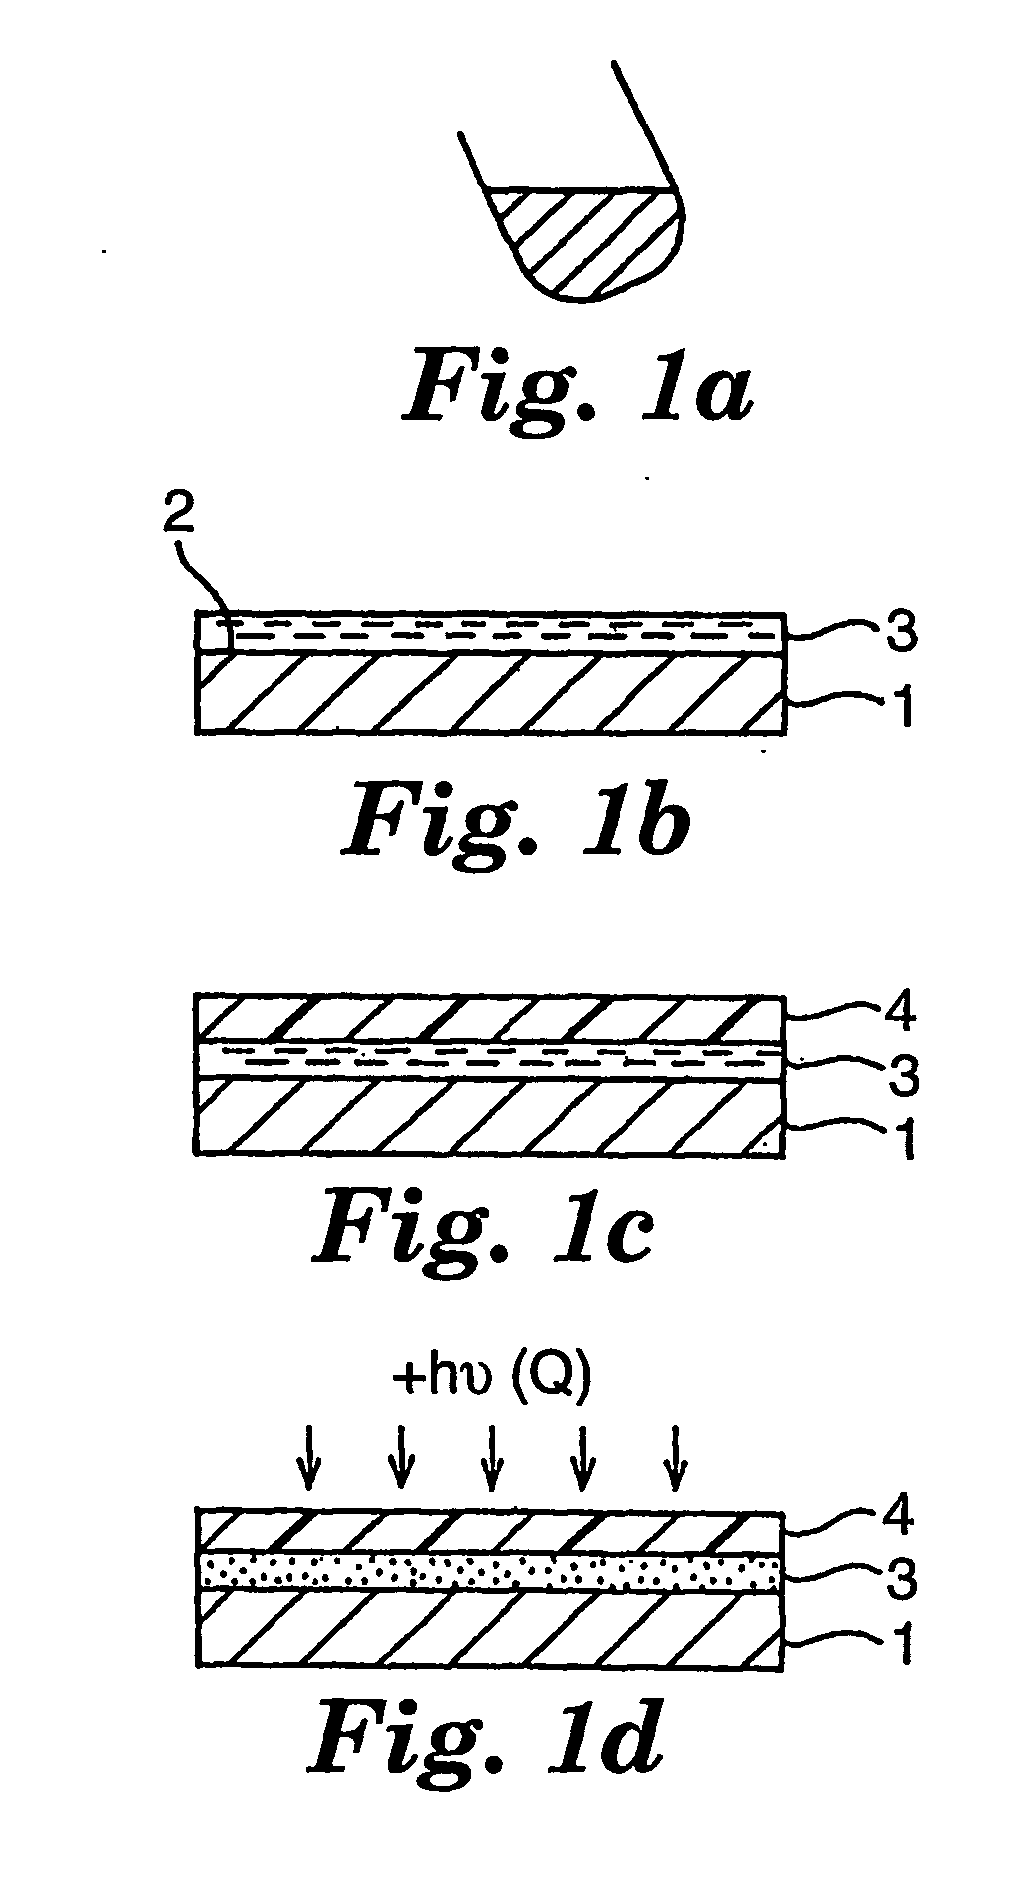 Semiconductor surface protecting sheet and method